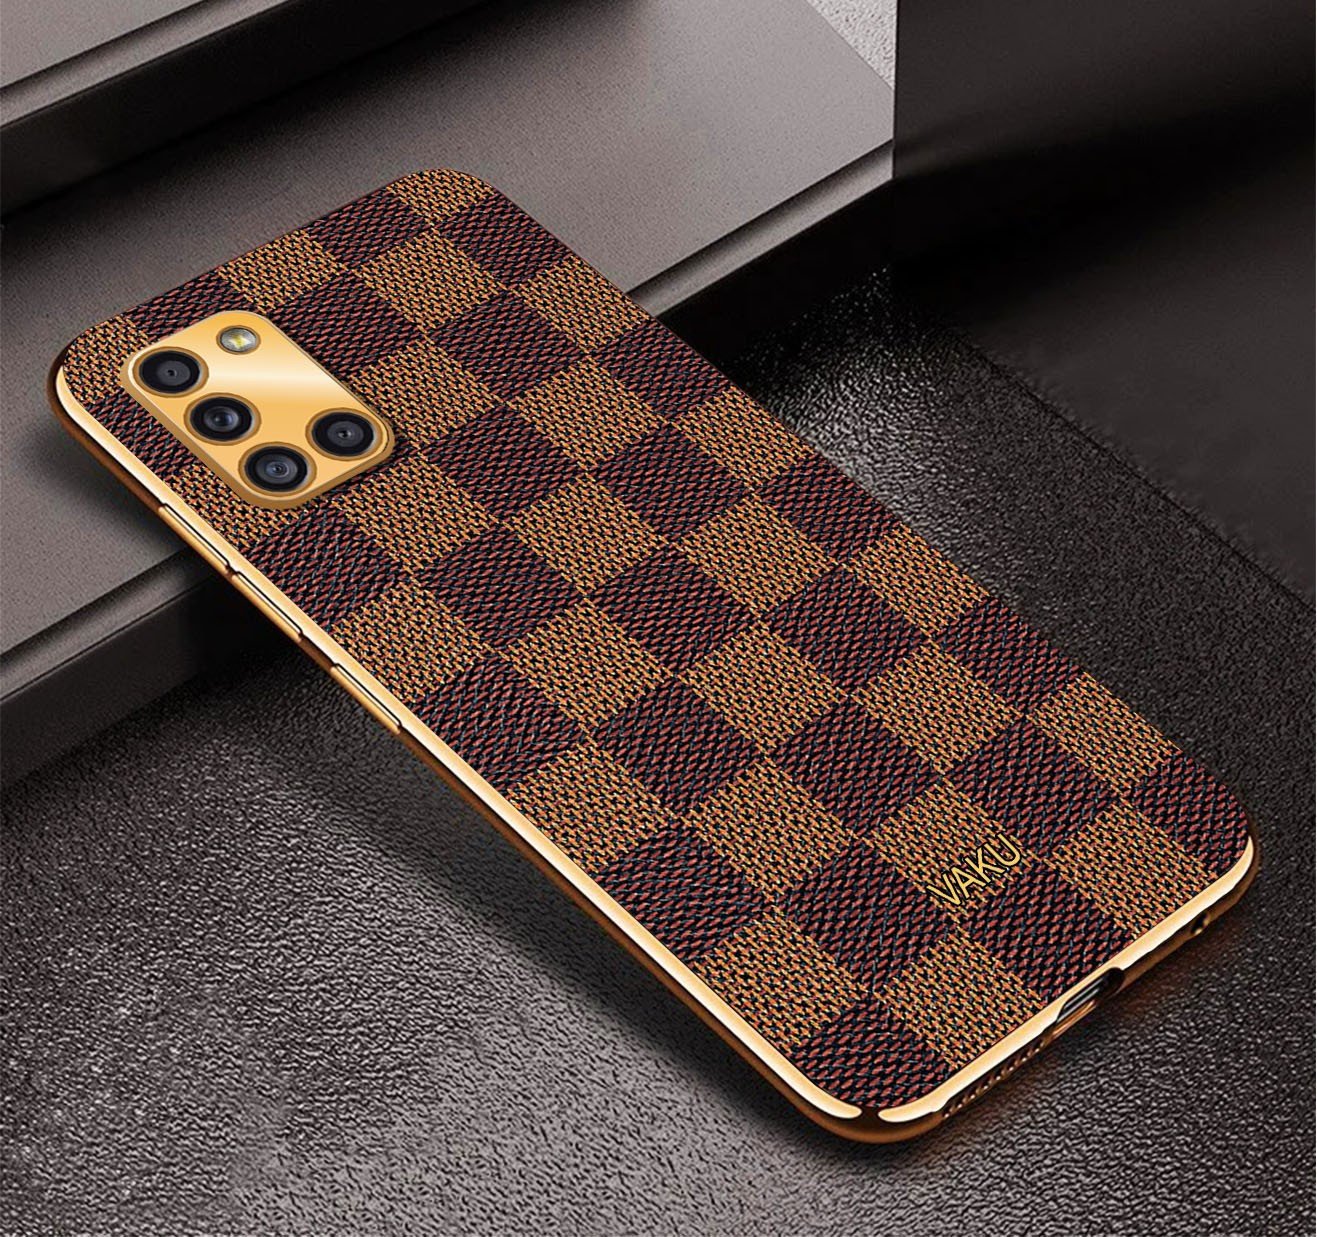 LOUIS VUITTON ROUND PATTERN iPhone 13 Pro Max Case Cover